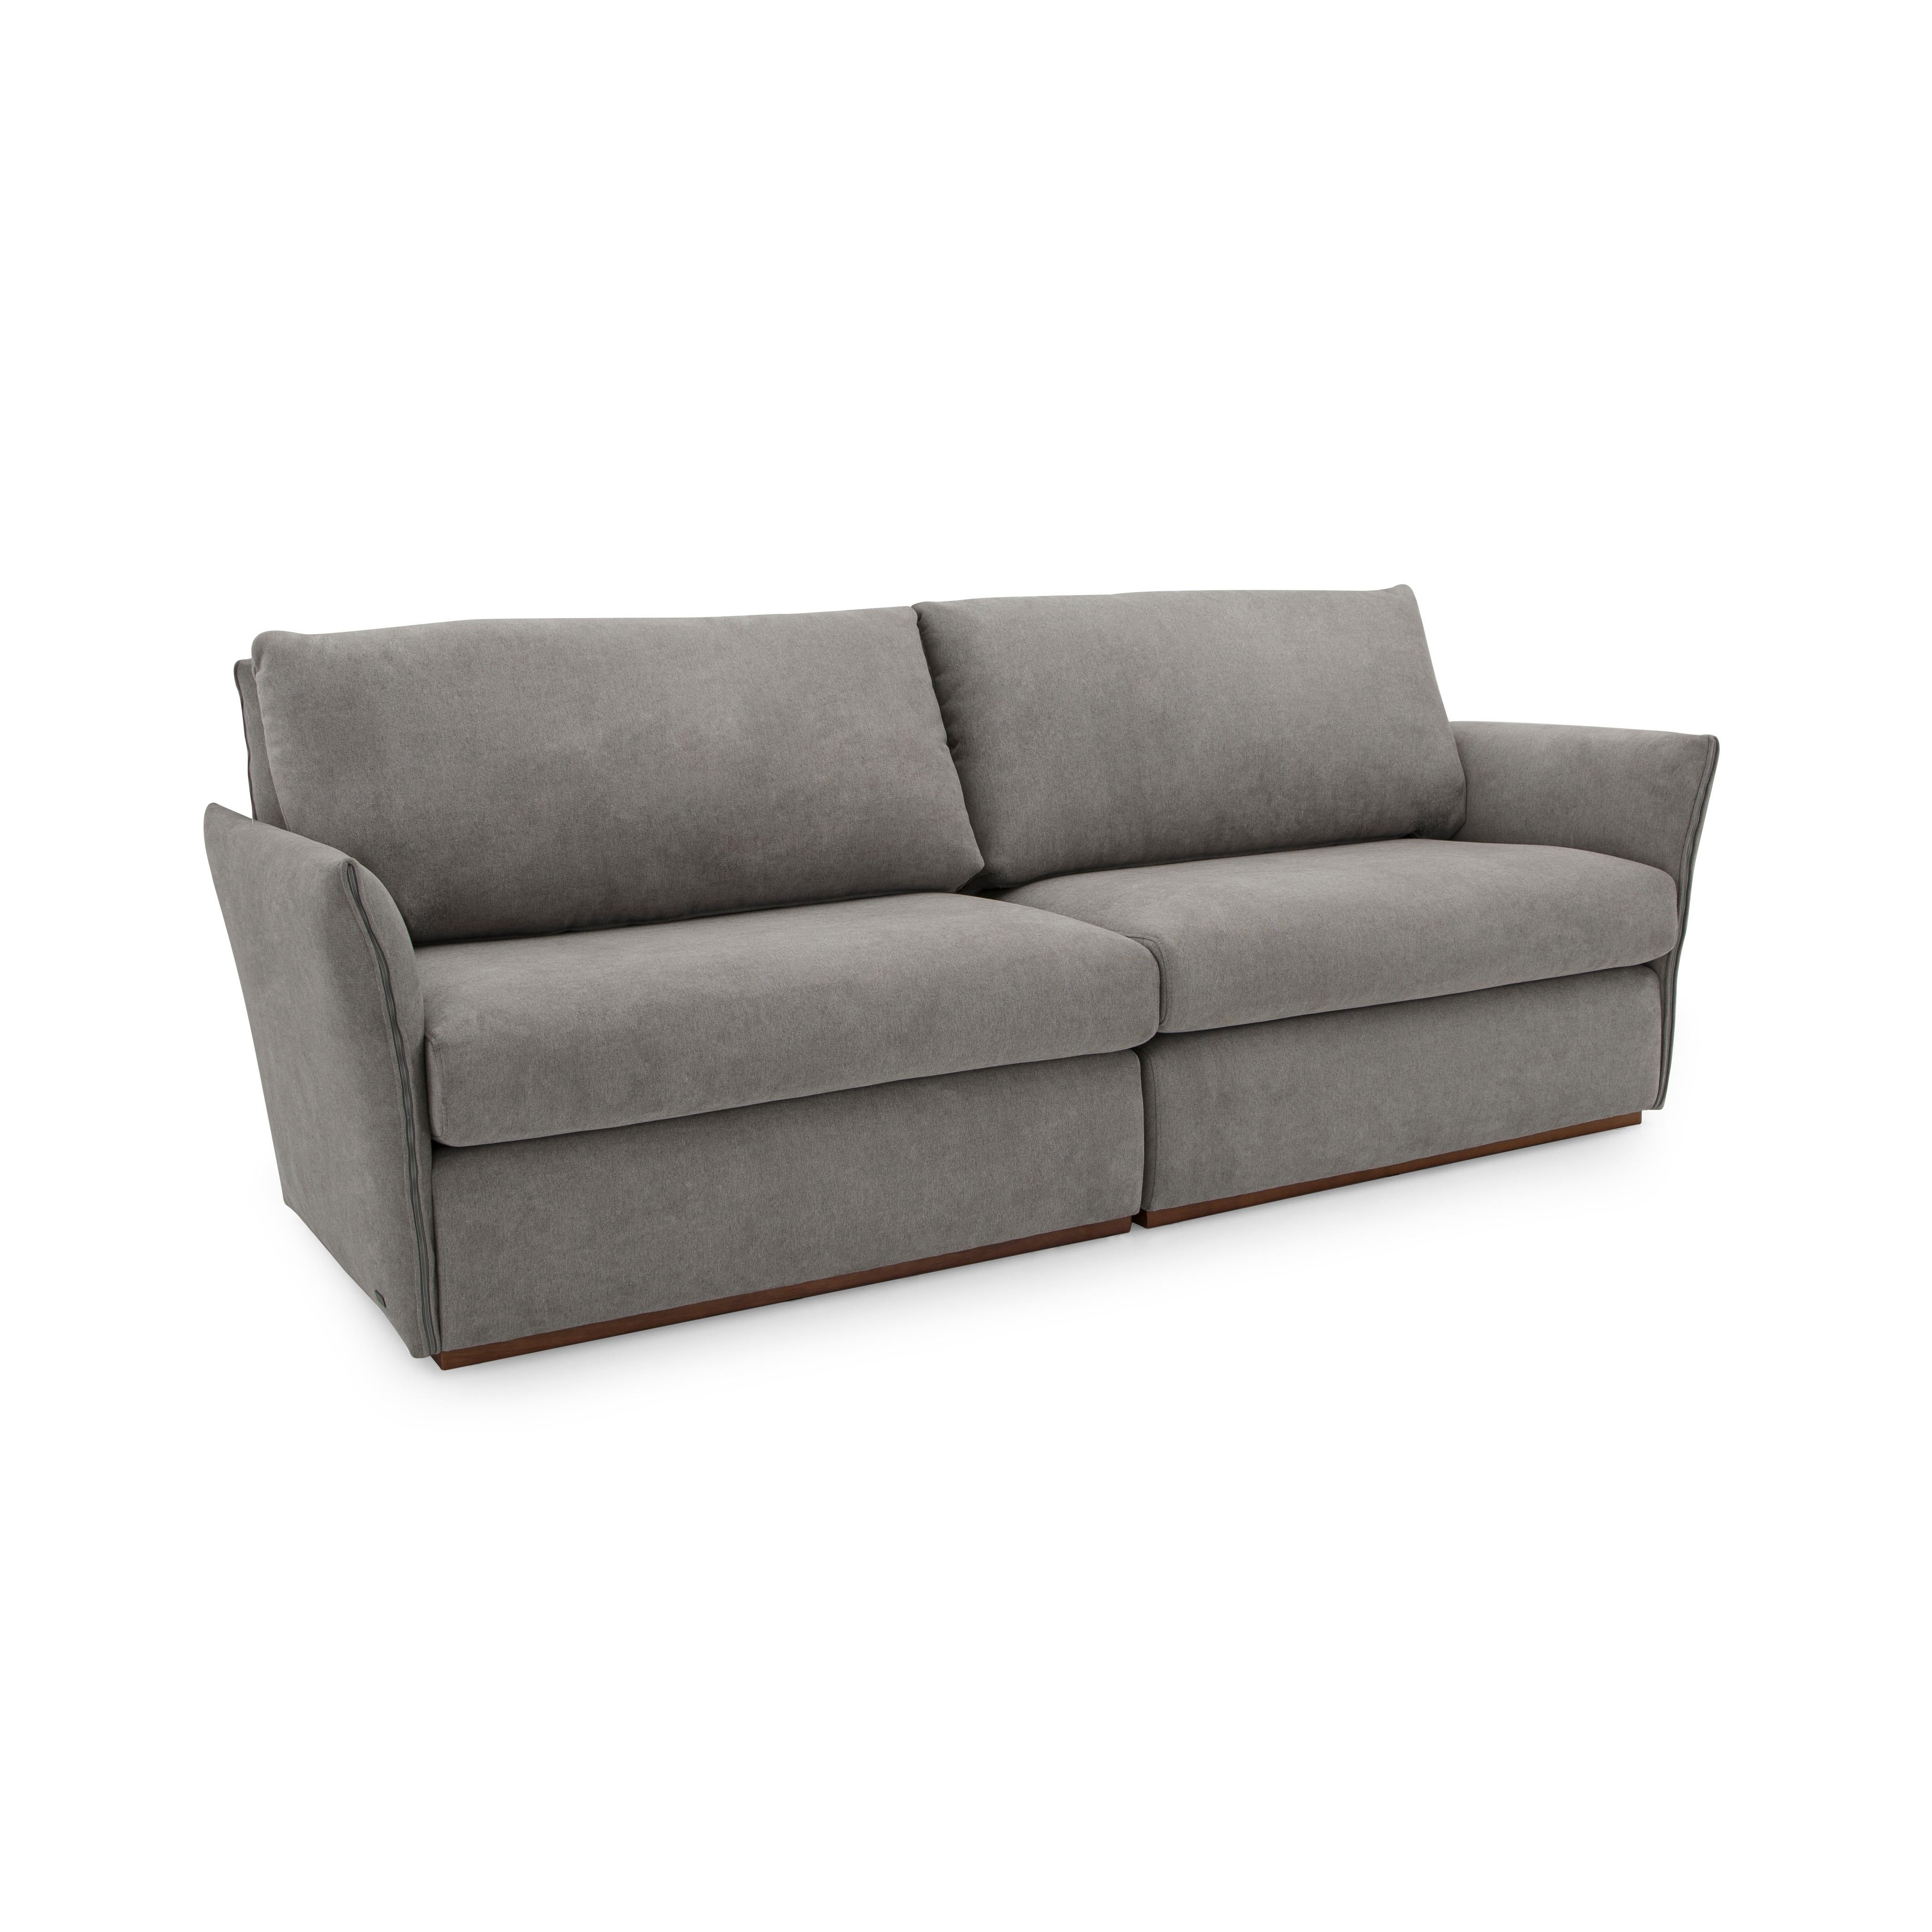 Thin Sofa with Bowed Arms in an Upholstered Gray Fabric In New Condition For Sale In Miami, FL